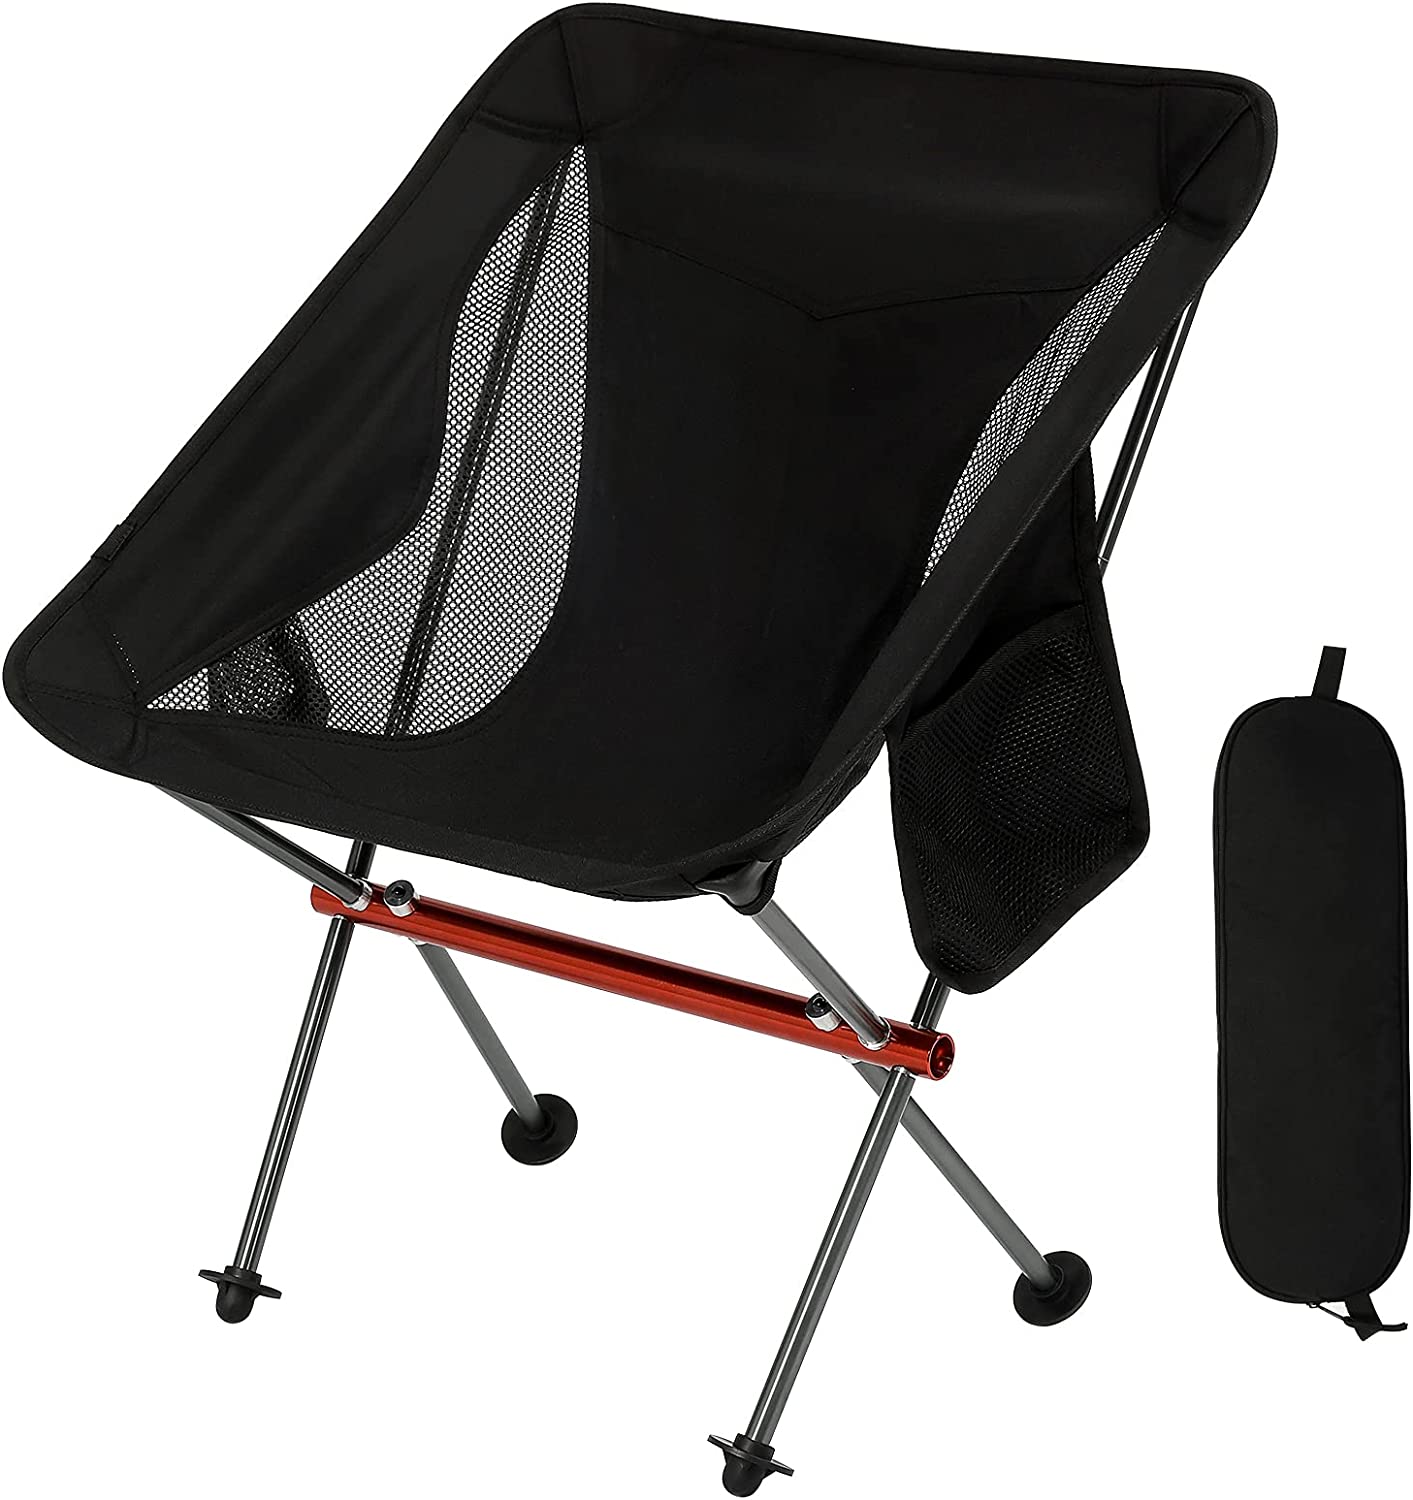 Portable Camping Chair, 300lbs Capacity with Wide Feet and Storage Bag, Black